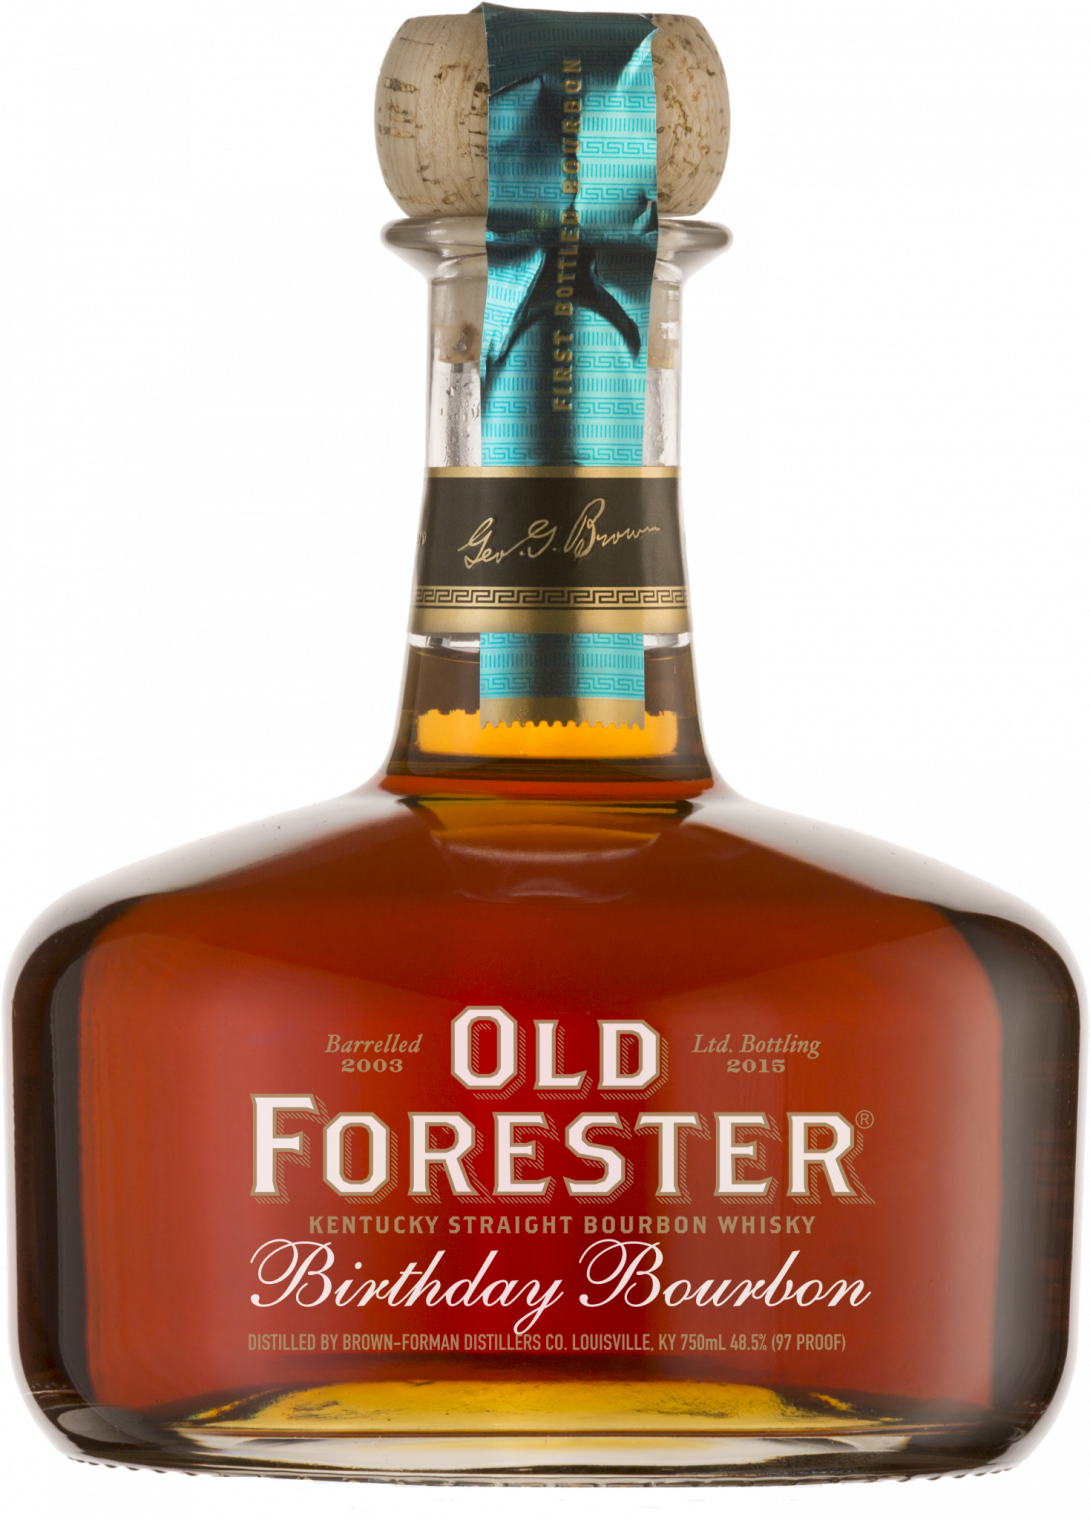 Old Forester 2015 Birthday Bourbon